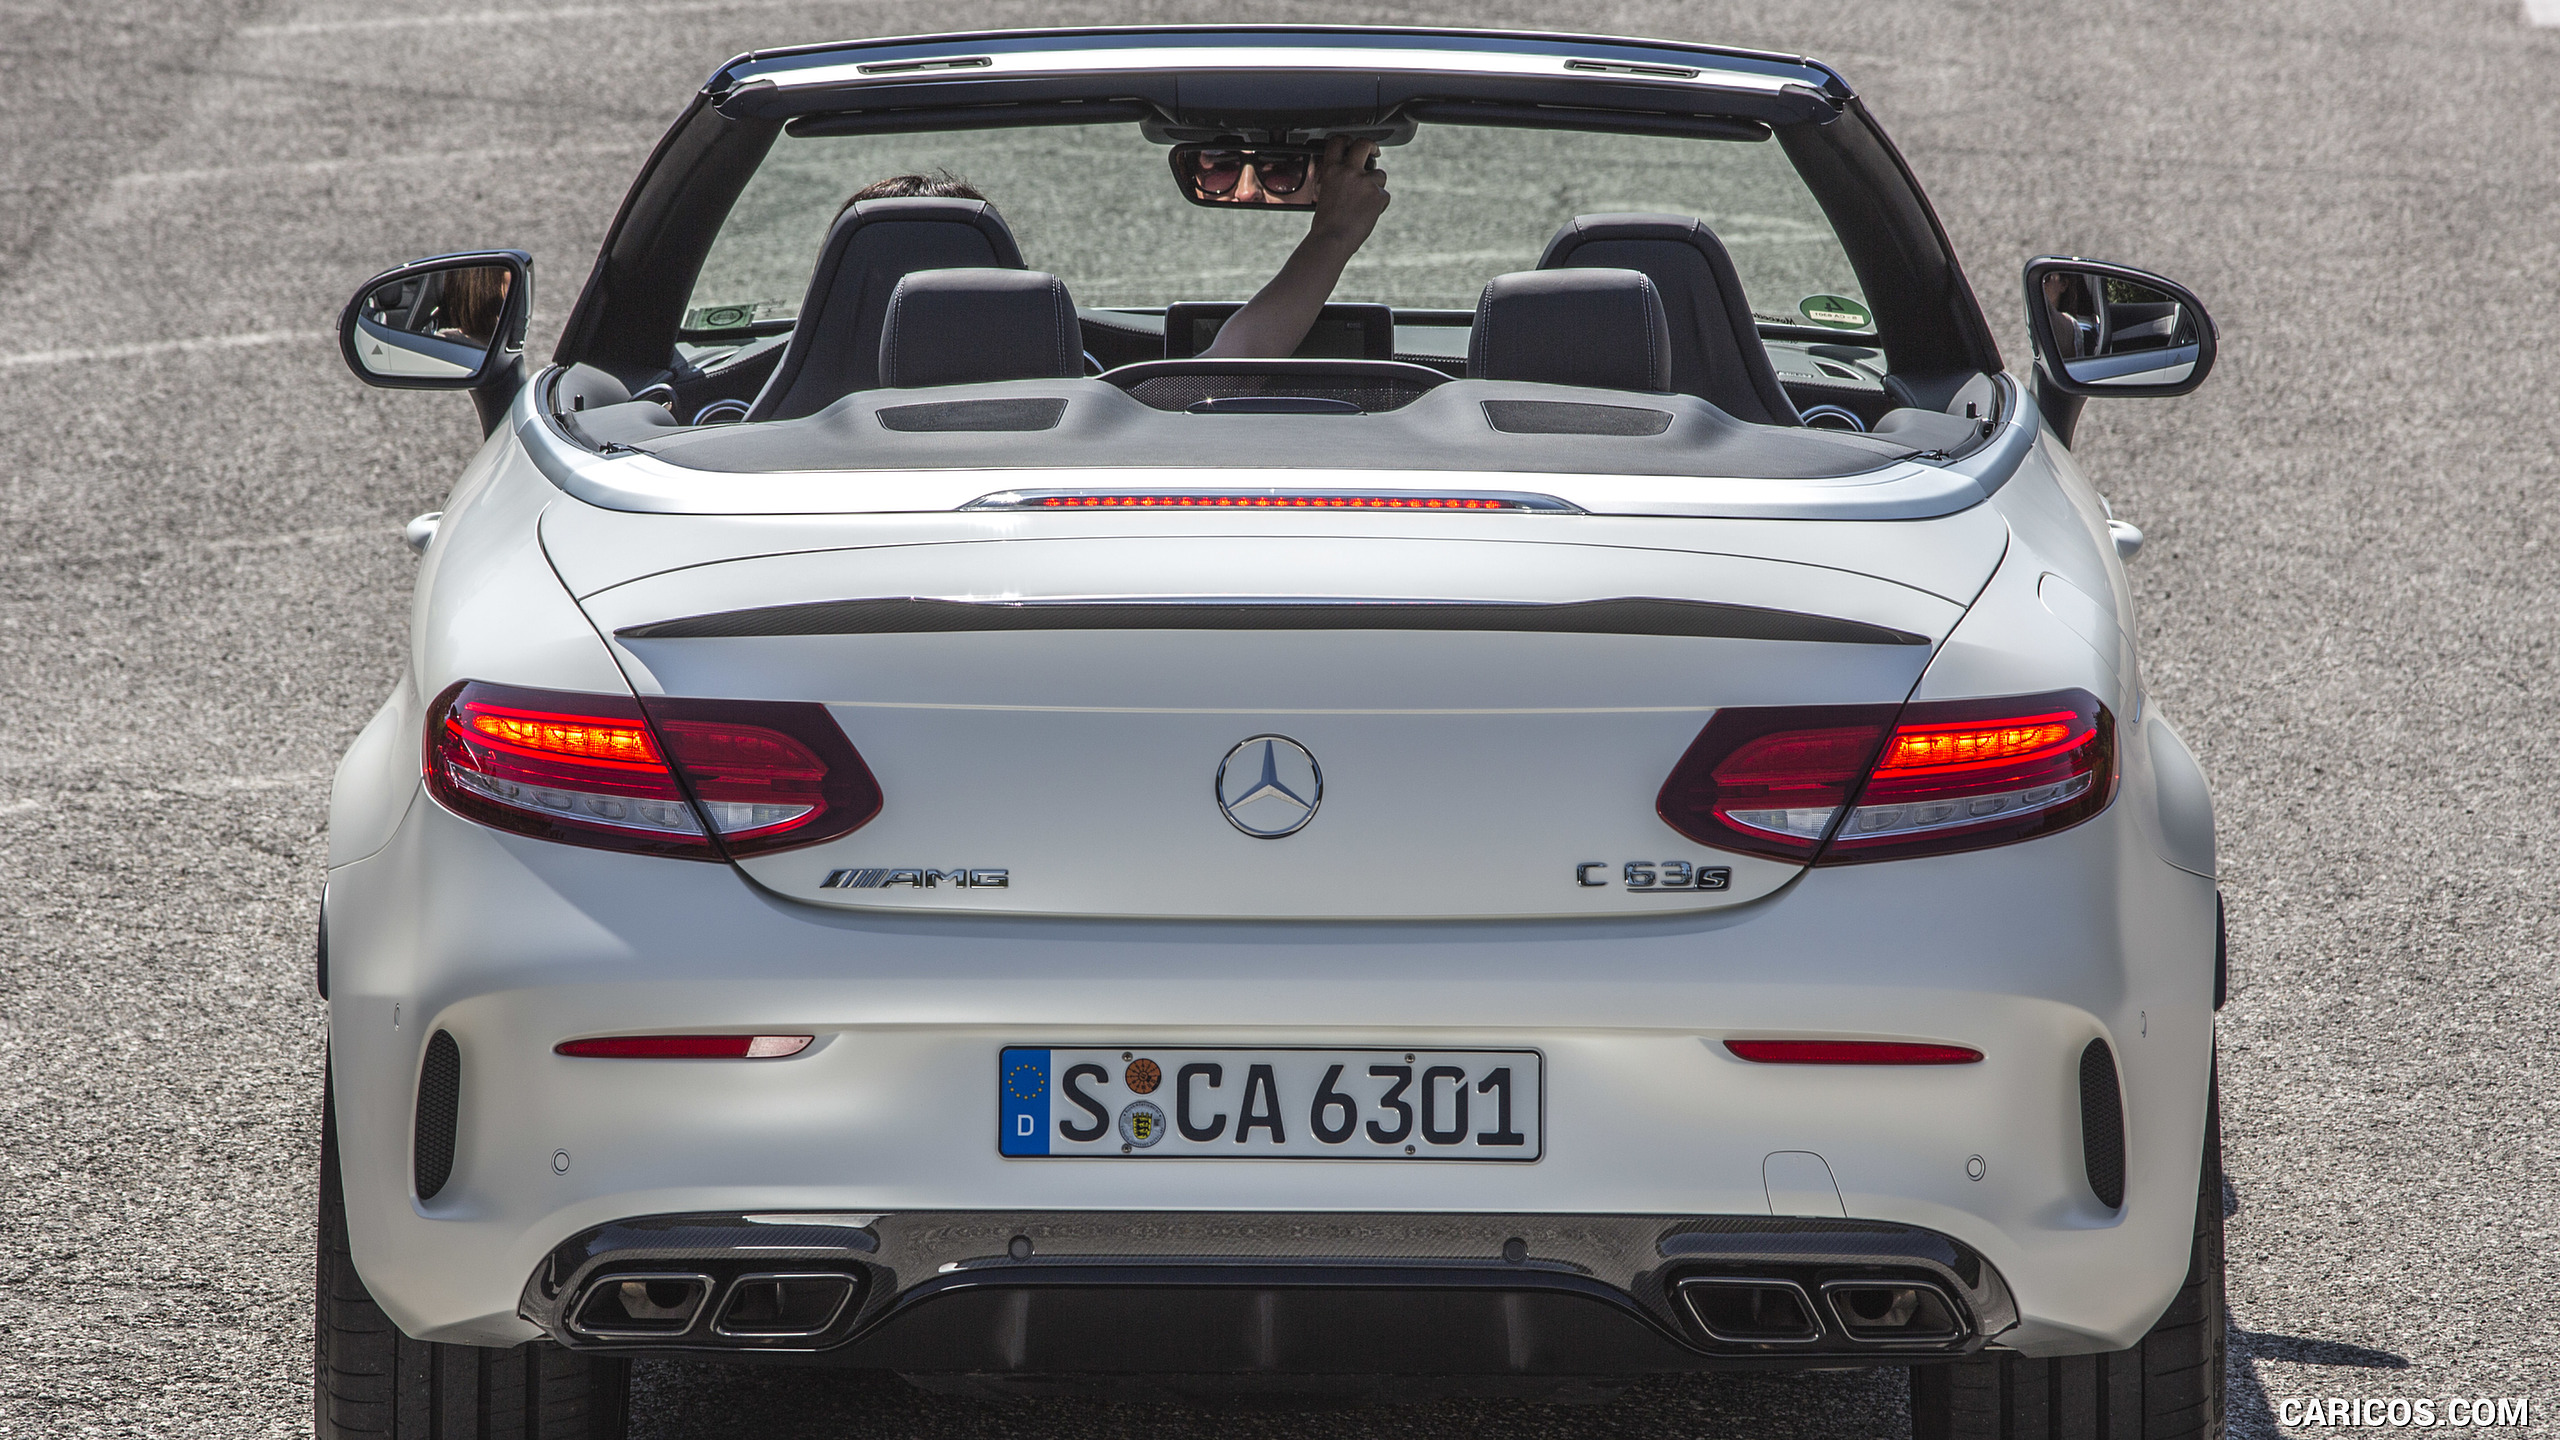 2017 Mercedes-AMG C63 S Cabriolet - Rear, #133 of 222